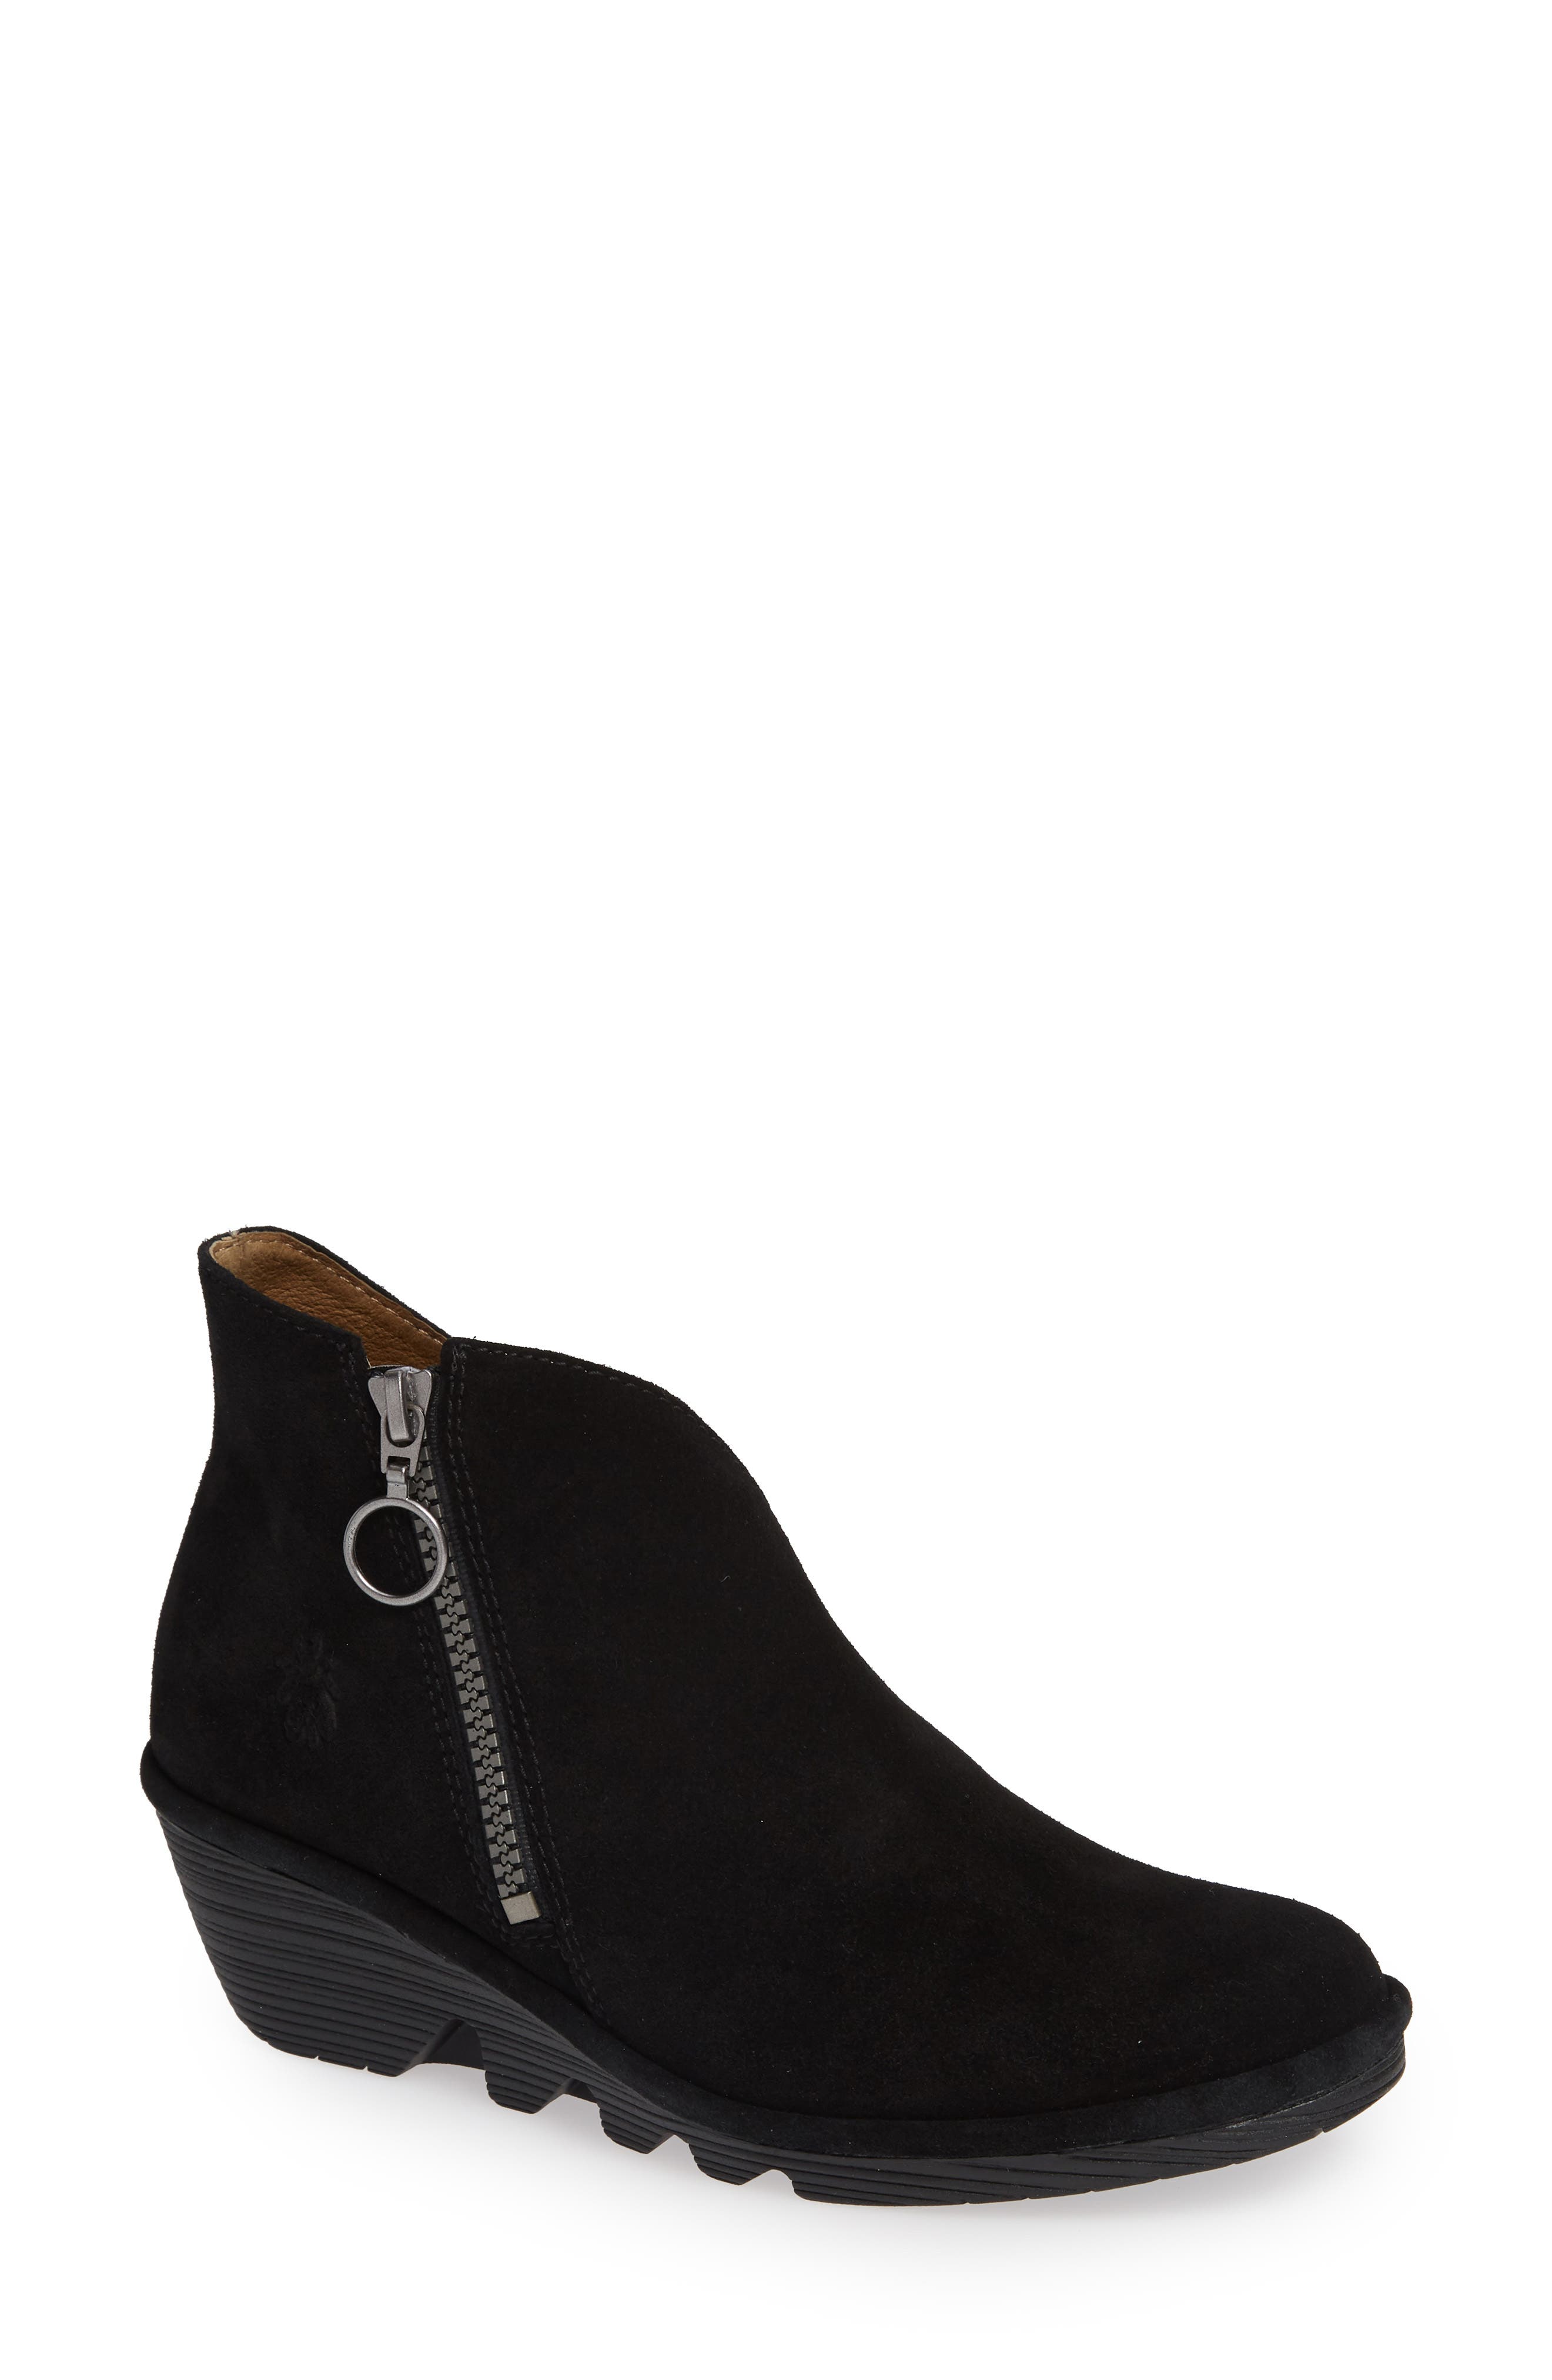 FLY London | Poro Wedge Bootie 